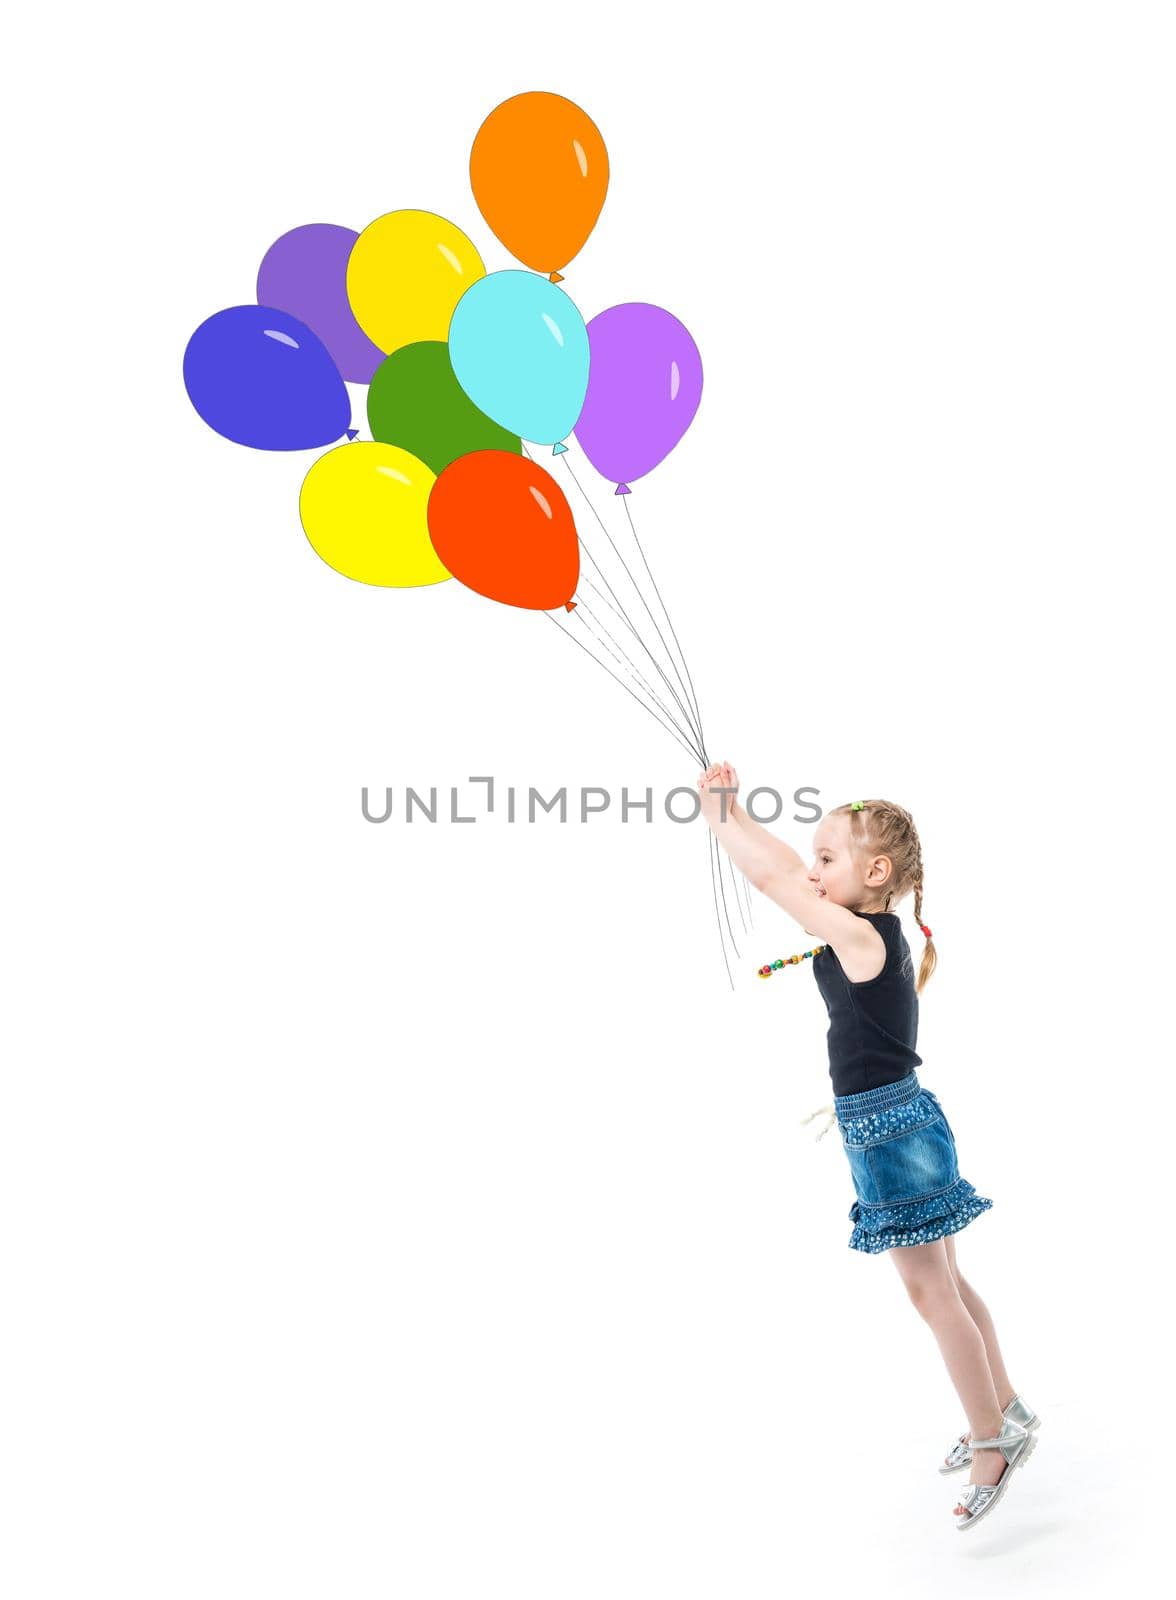 Cute little girl in lovely jeans skirt jumping up and reaching colorful balloons